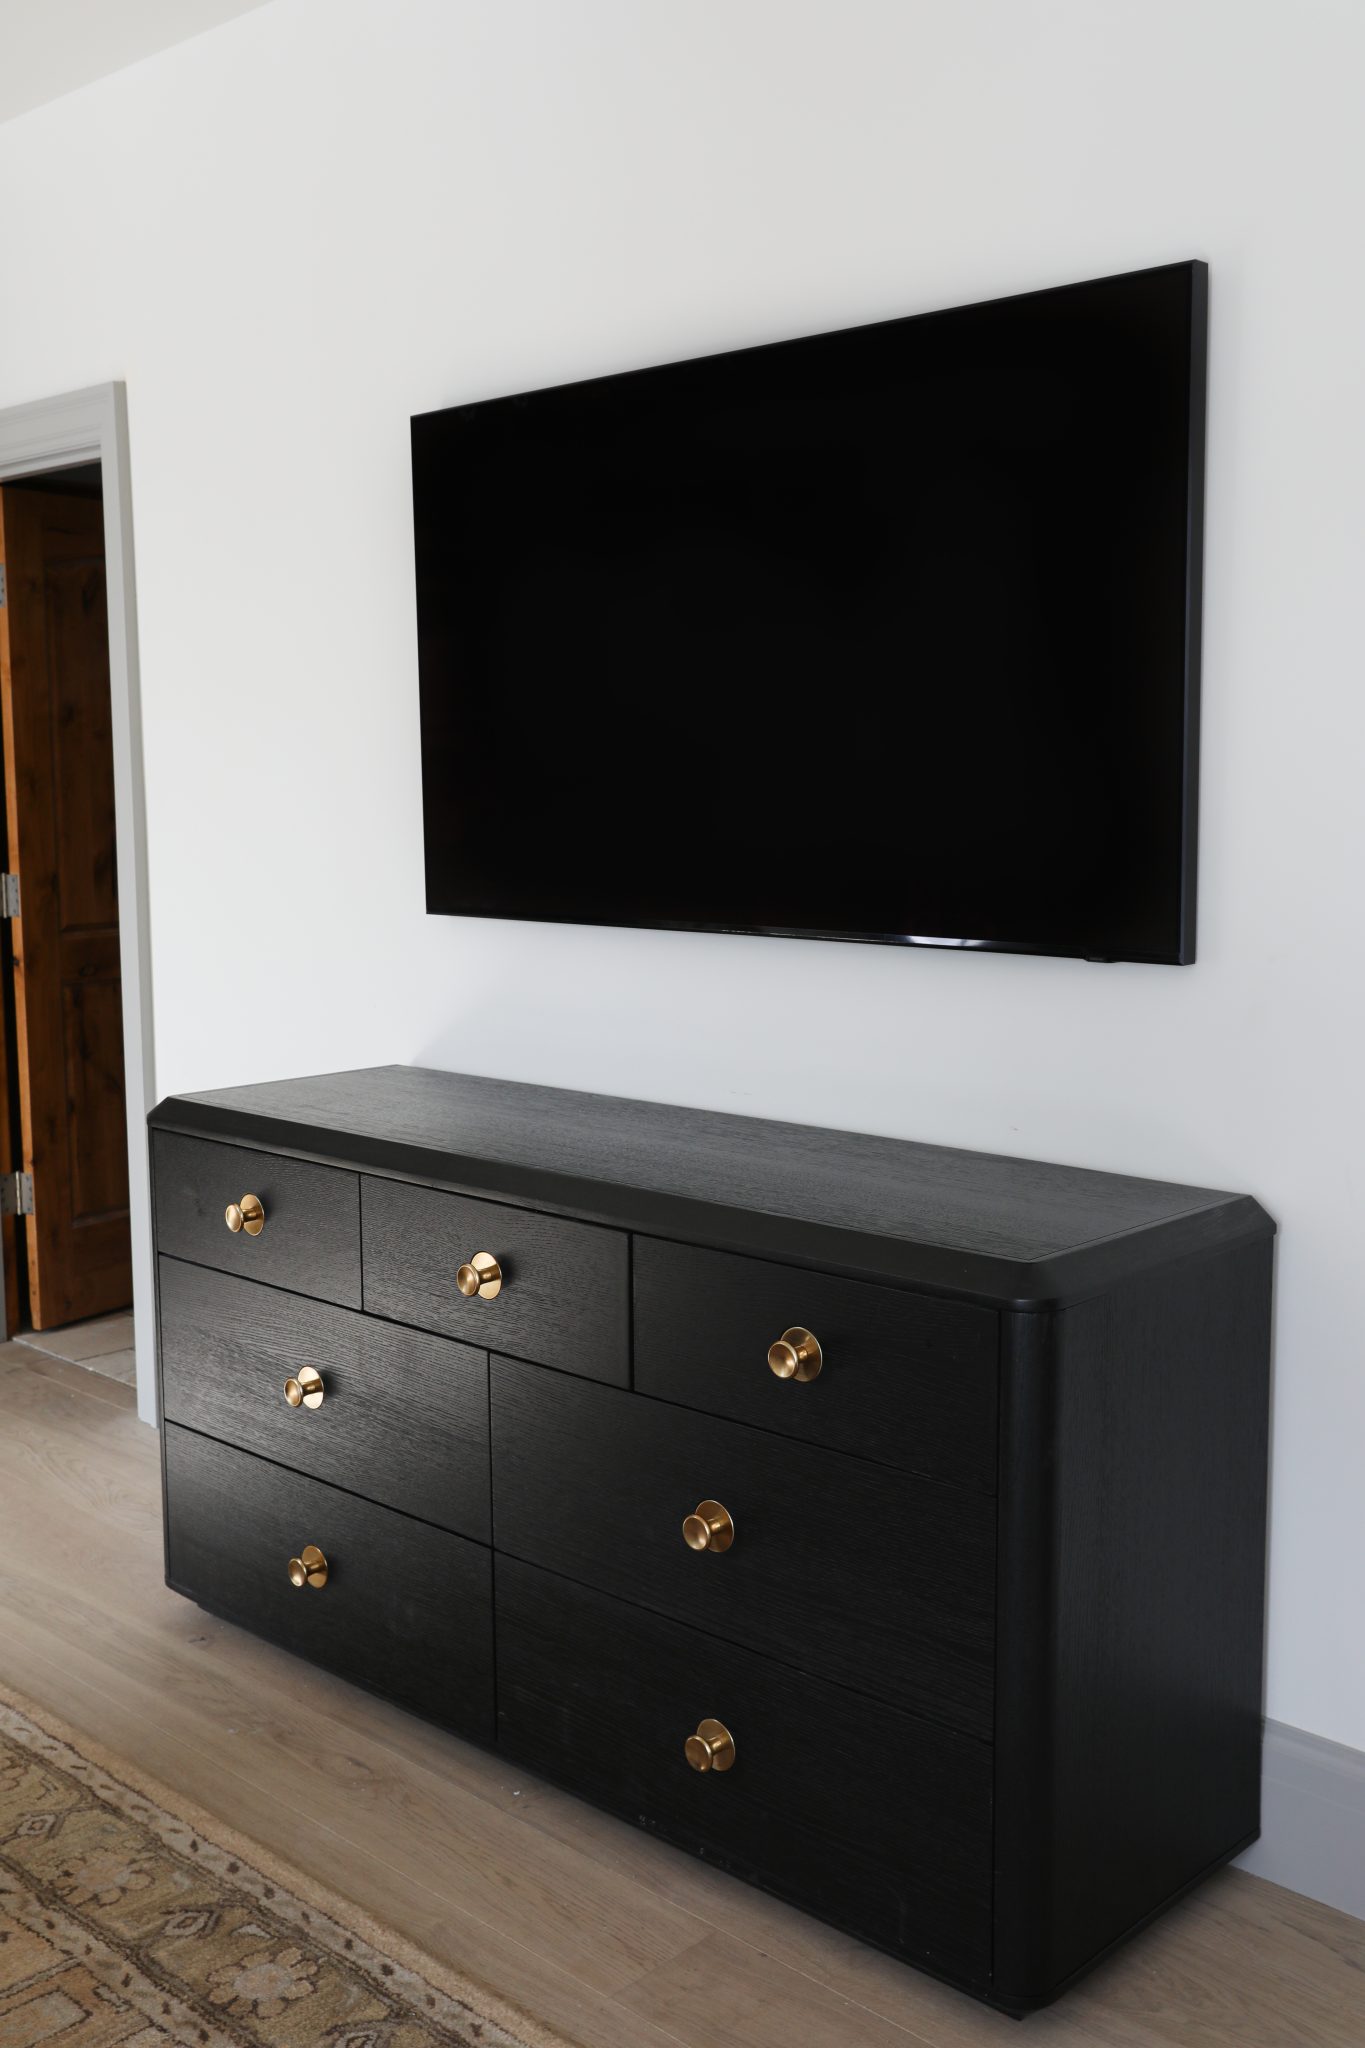 How to Hide Television Cords – Love & Renovations